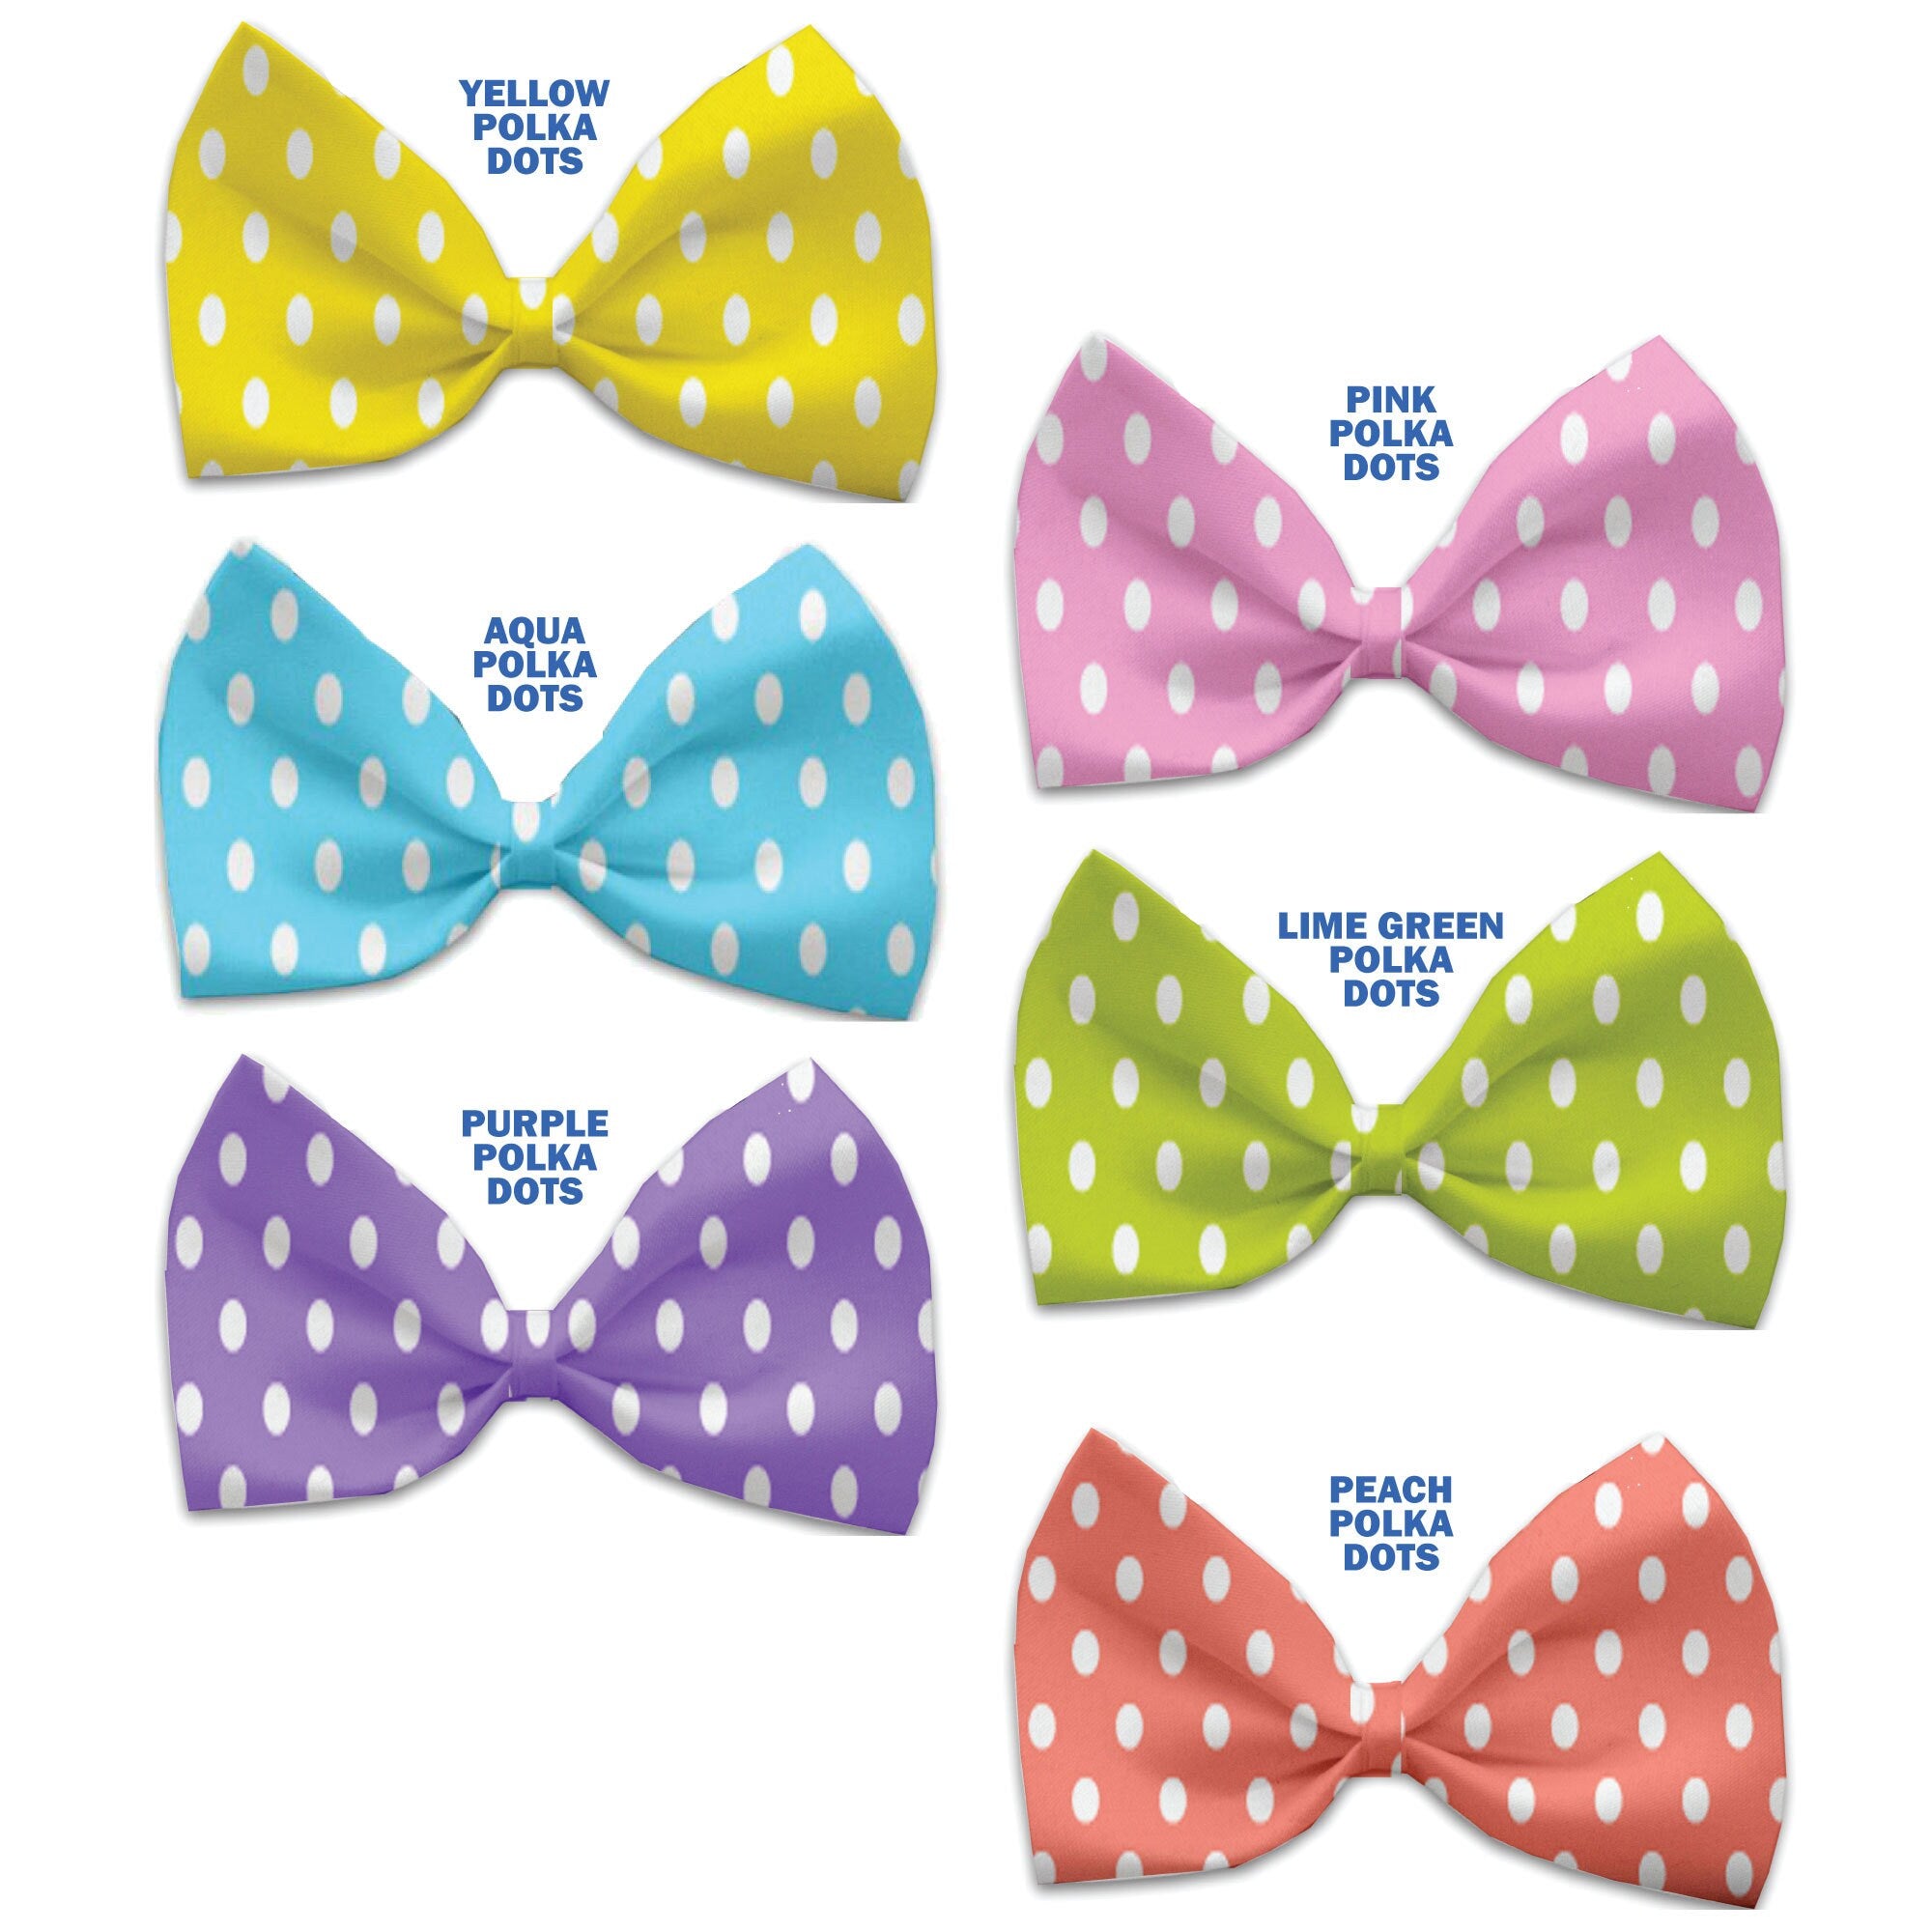 Pet, Dog and Cat Bow Ties, "Polka Dots Group" *Available in 6 different pattern options!*